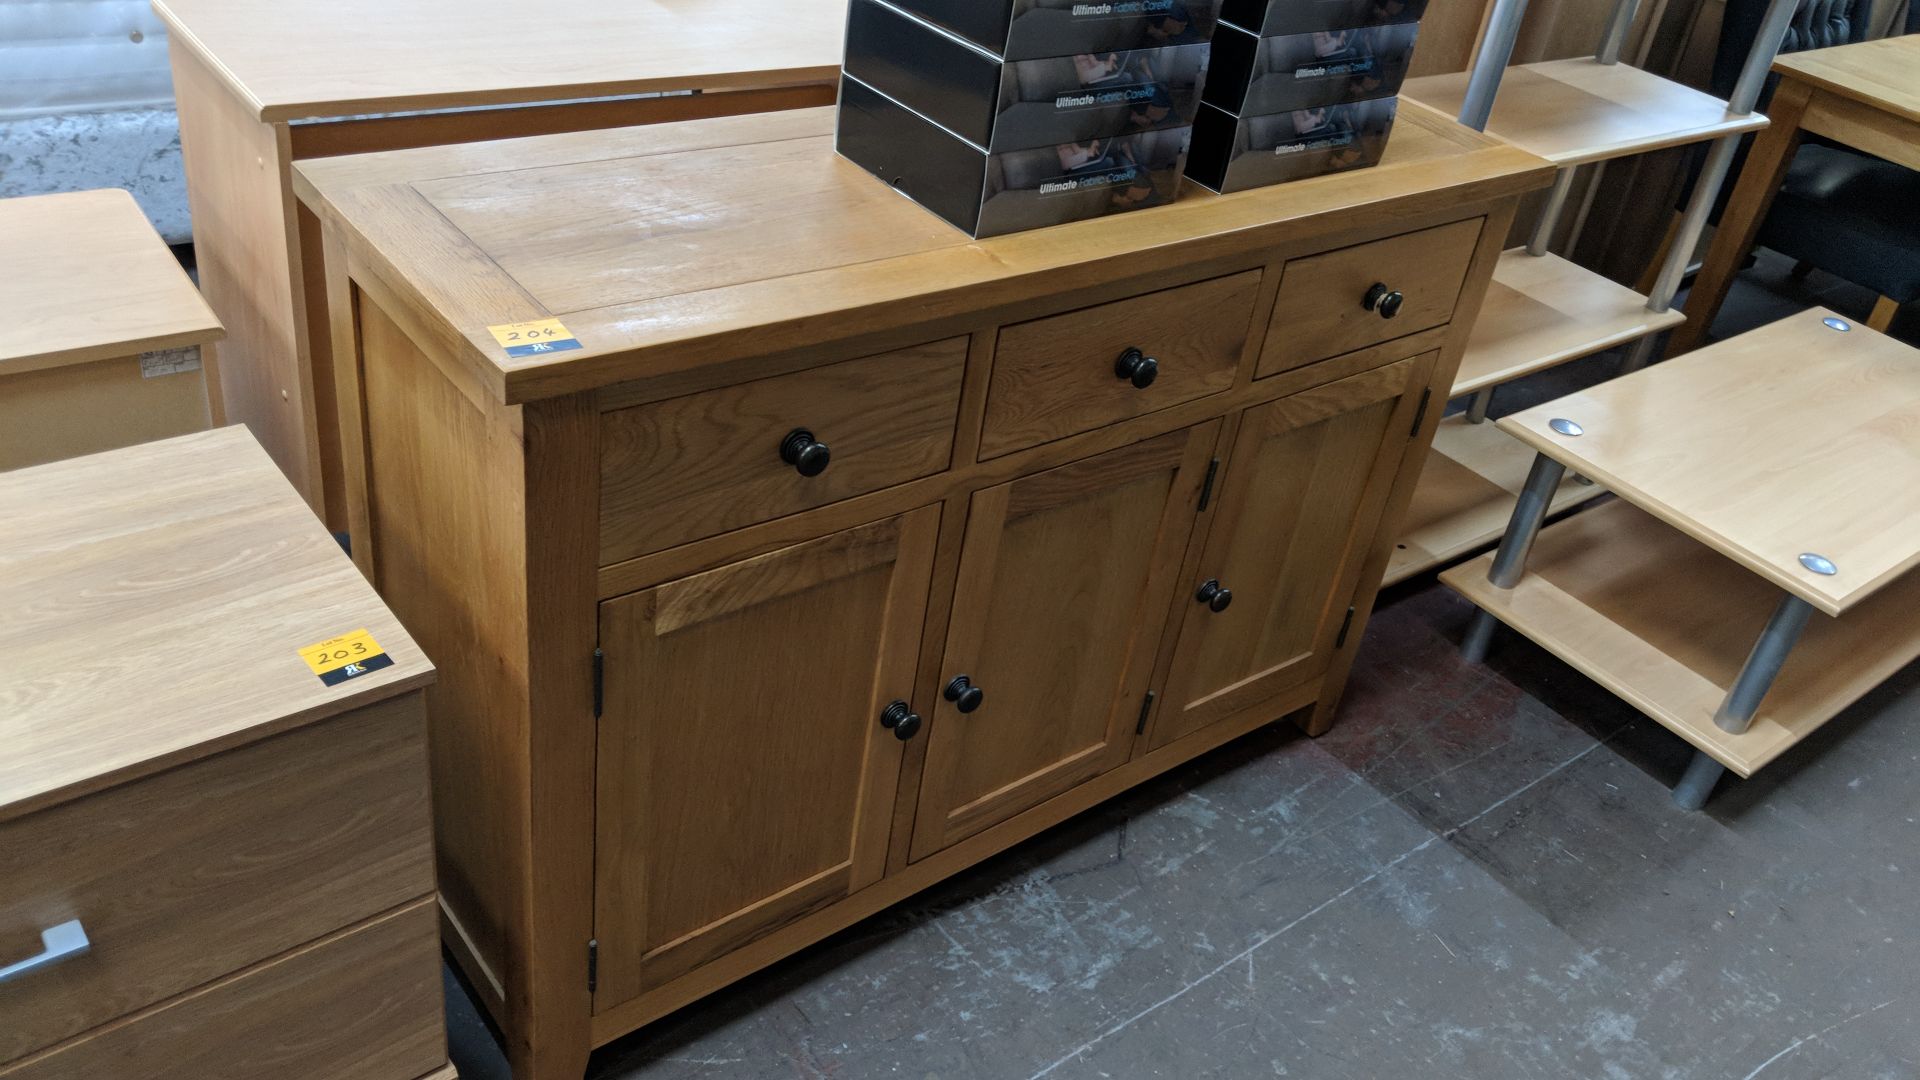 3 door sideboard. NB matches lot 209 IMPORTANT: Please remember goods successfully bid upon must